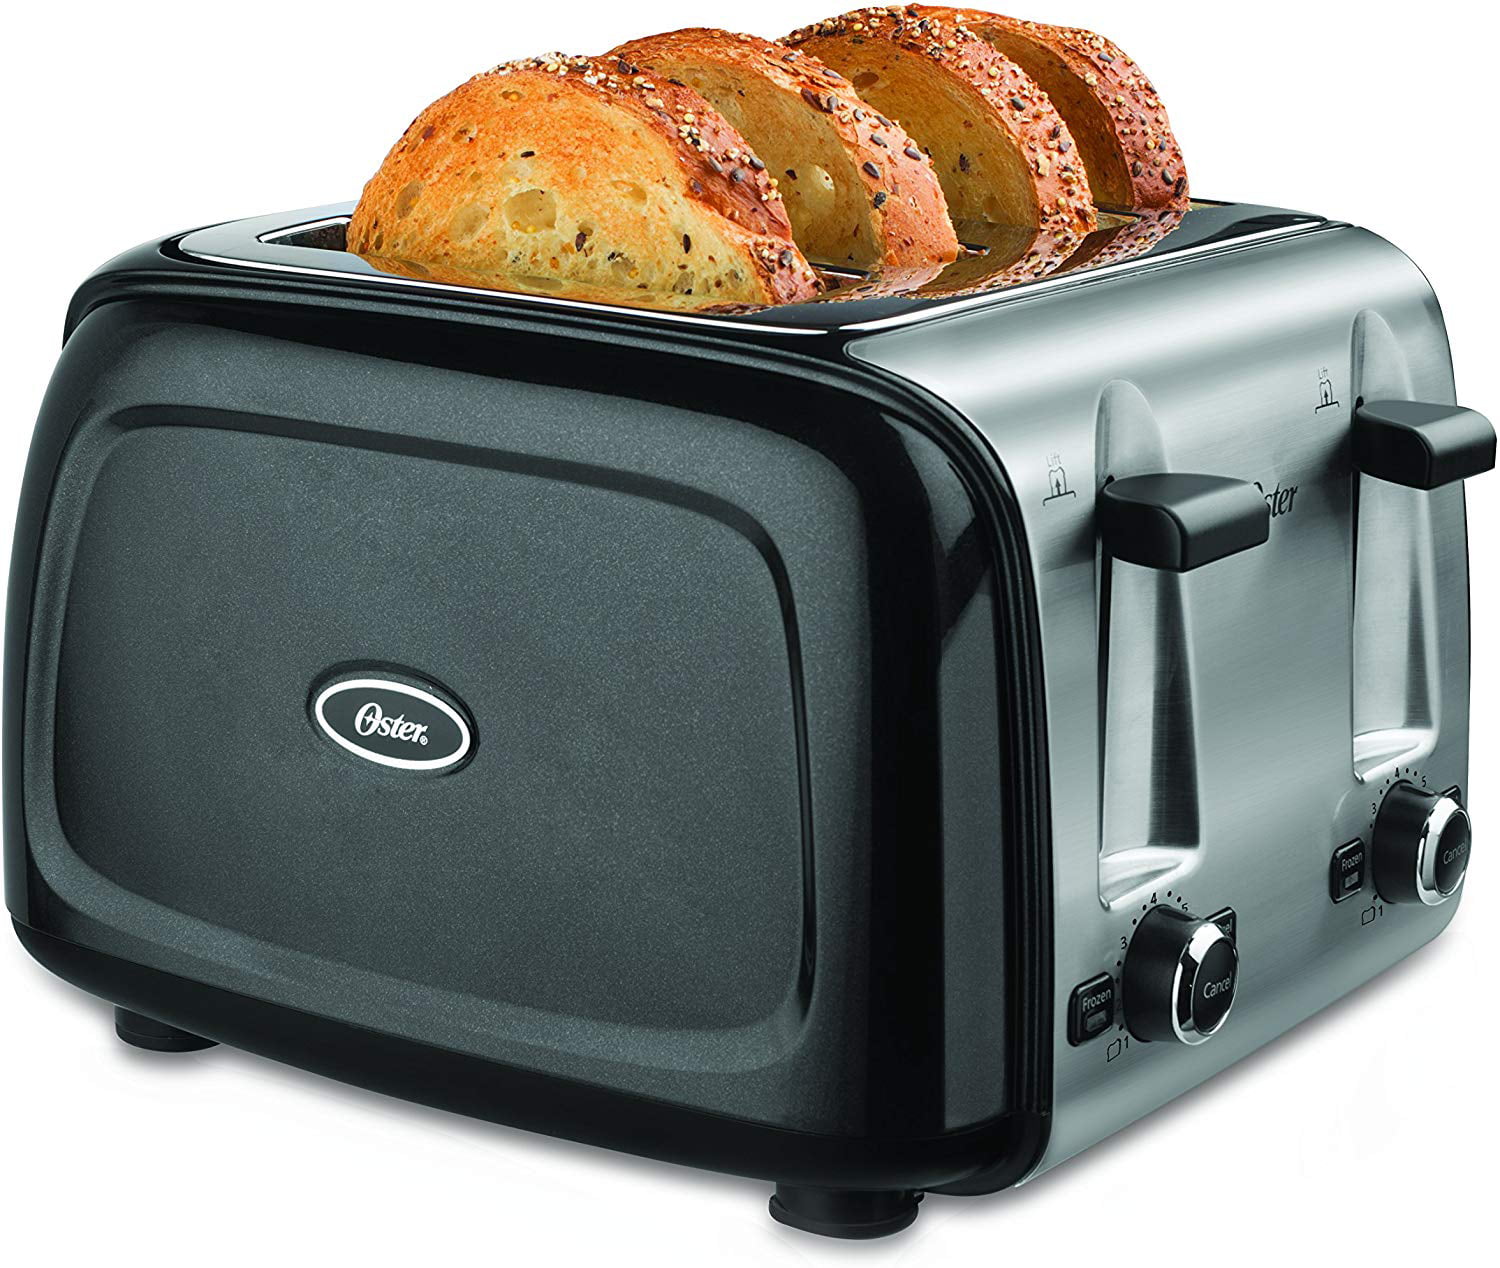 oster-4-slice-toaster-tssttrpmb4-np-extra-wide-slots-and-made-easy